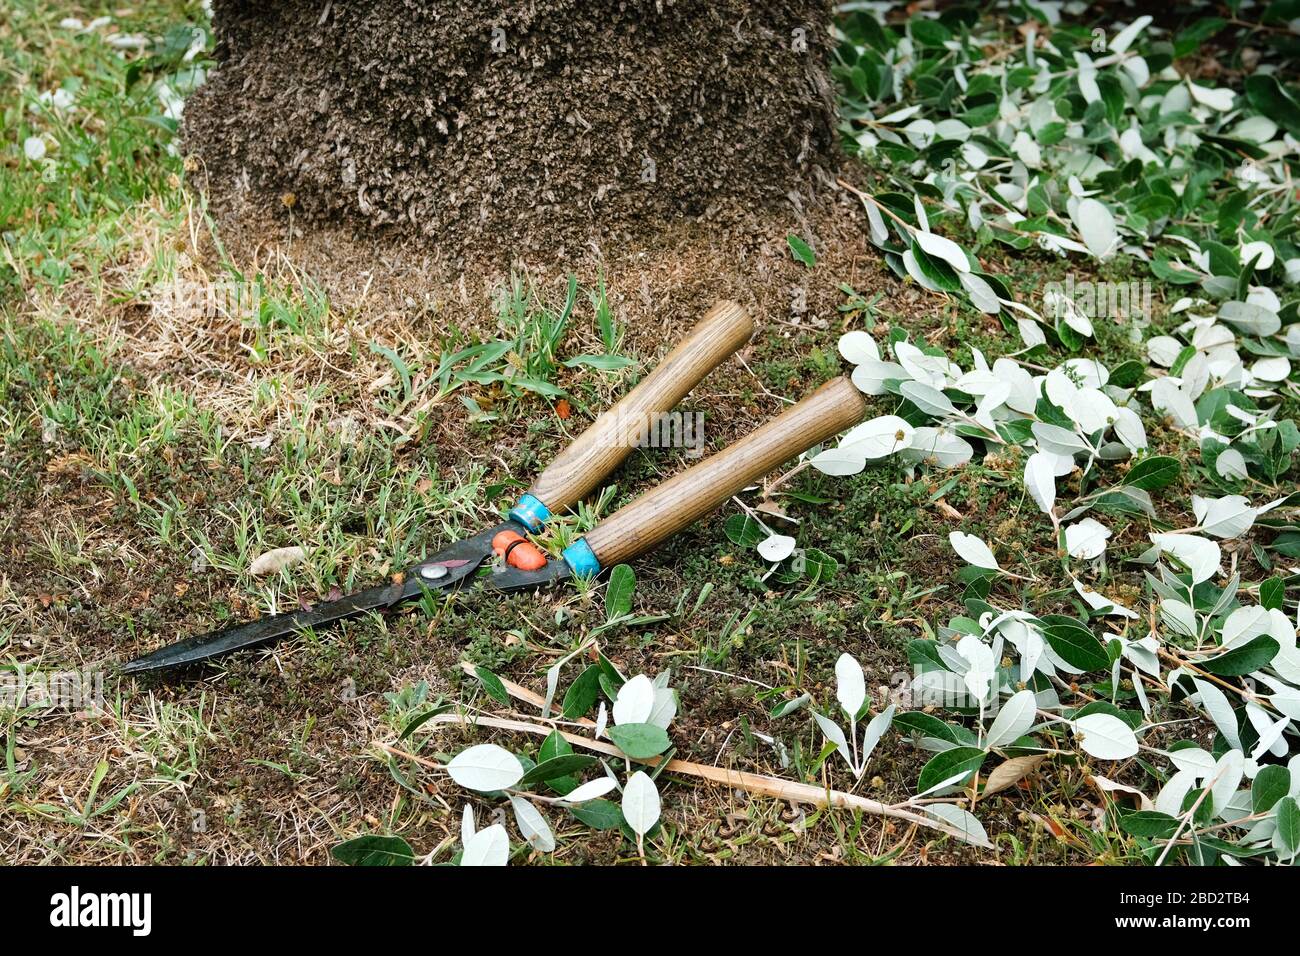 Garden clippers lie on ground after cutting branches. Concept of cutting trees and shrubs. Stock Photo